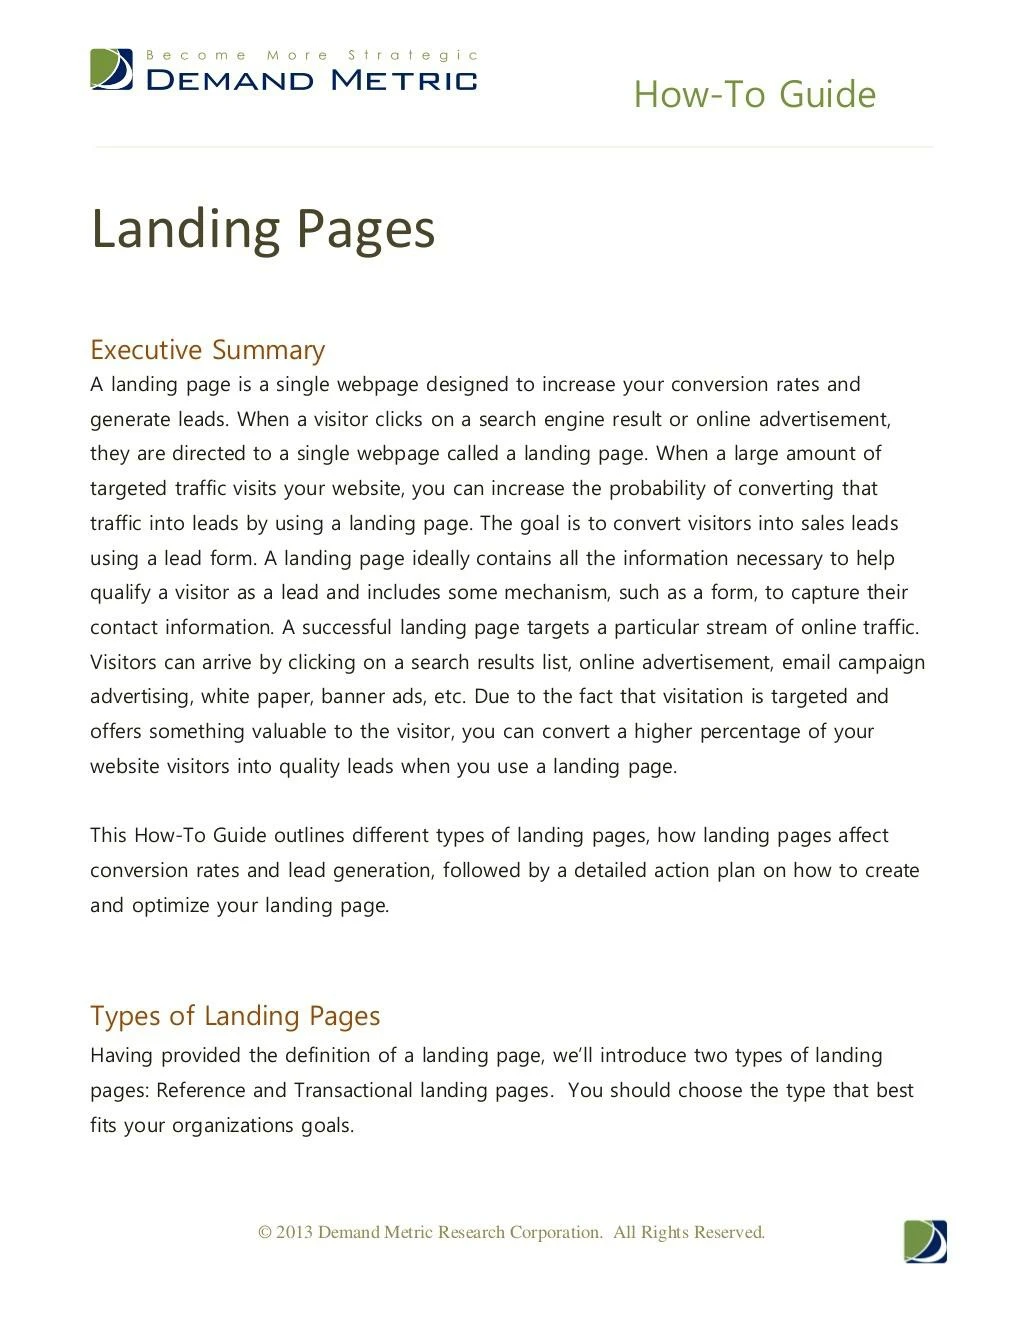 how to guide landing pages